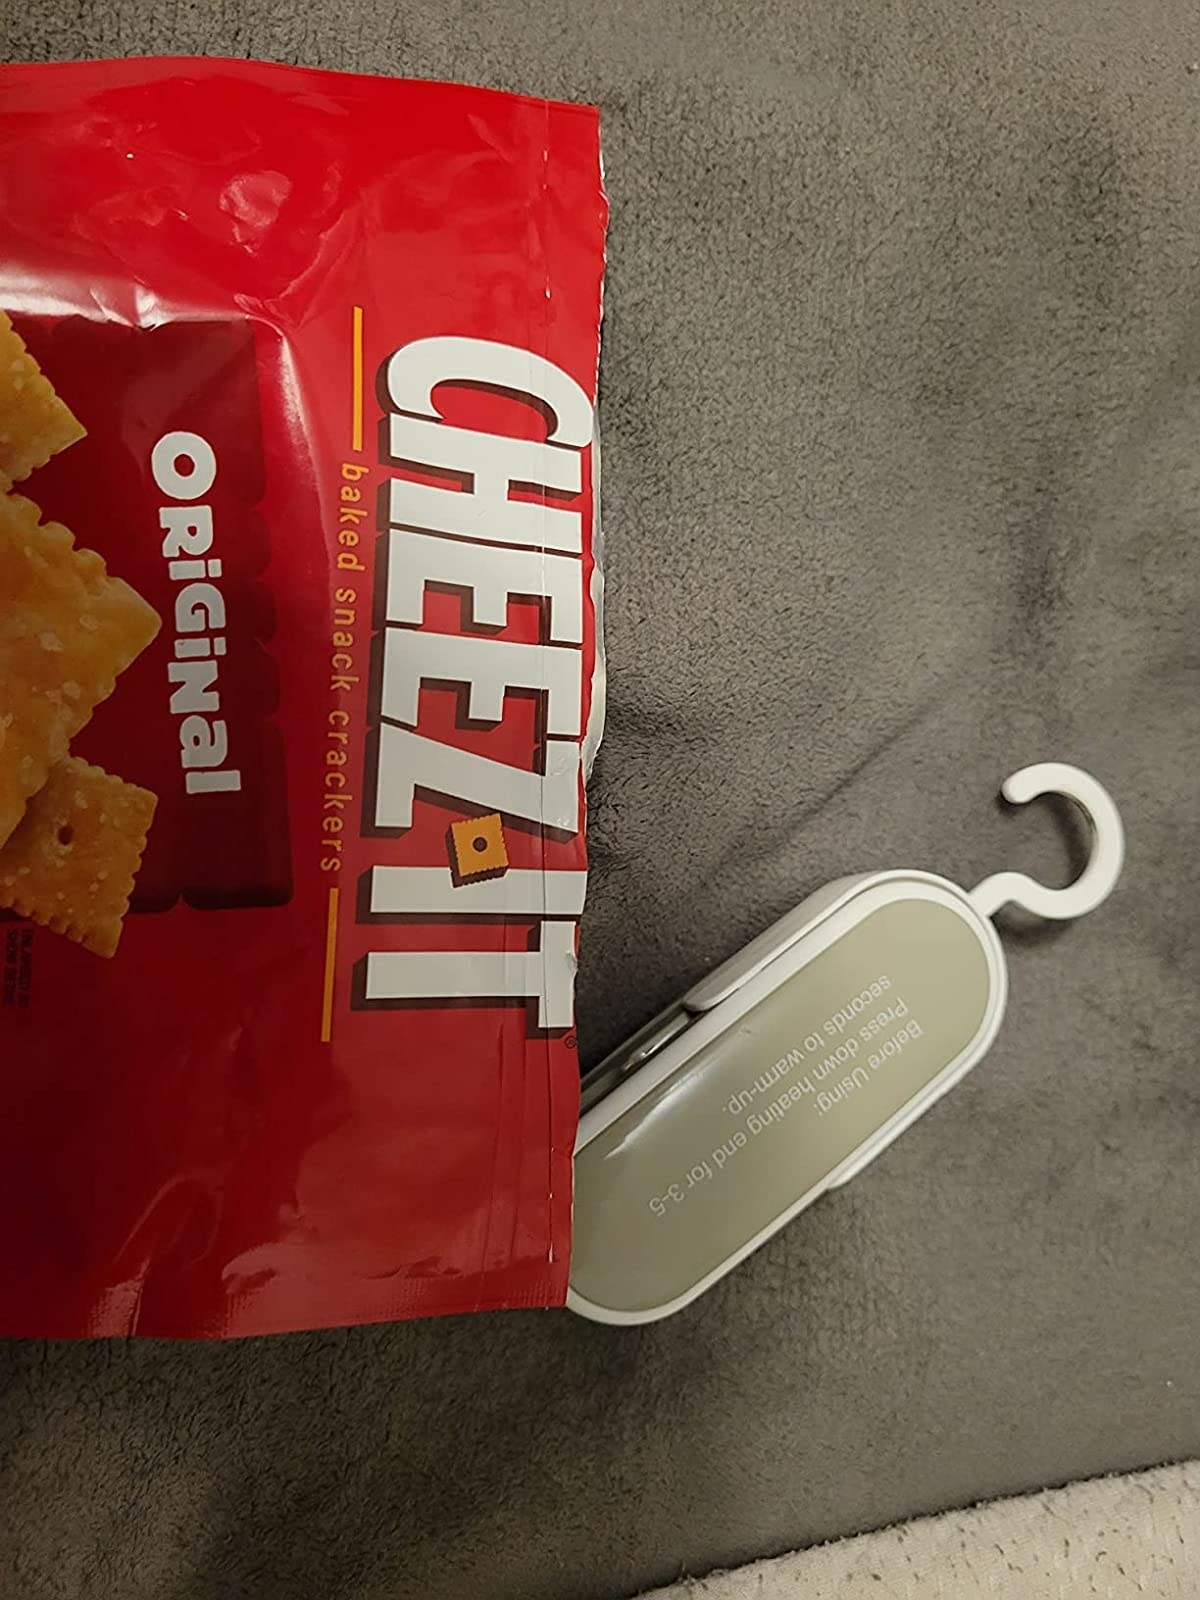 Reviewer image of sealer and chip bag